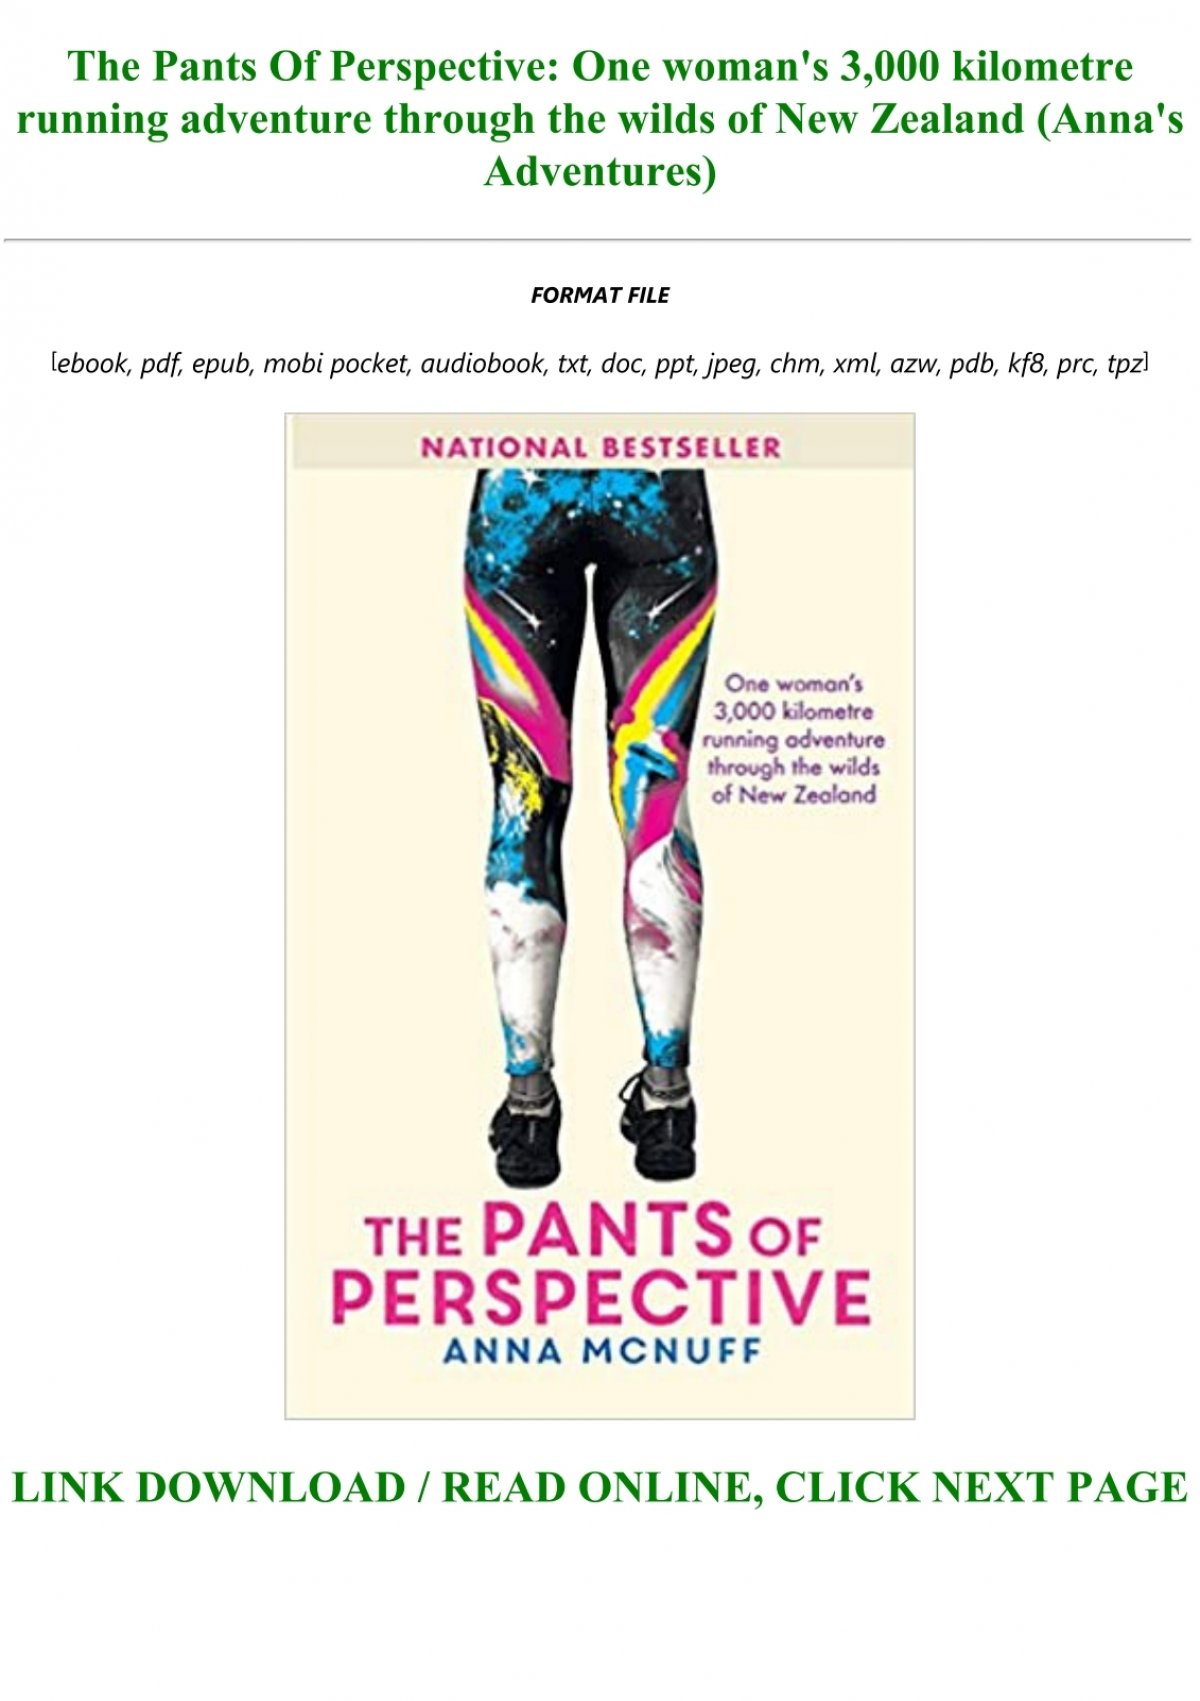 The Pants Of Perspective: A 3,000 kilometre running adventure through the  wilds of New Zealand See more